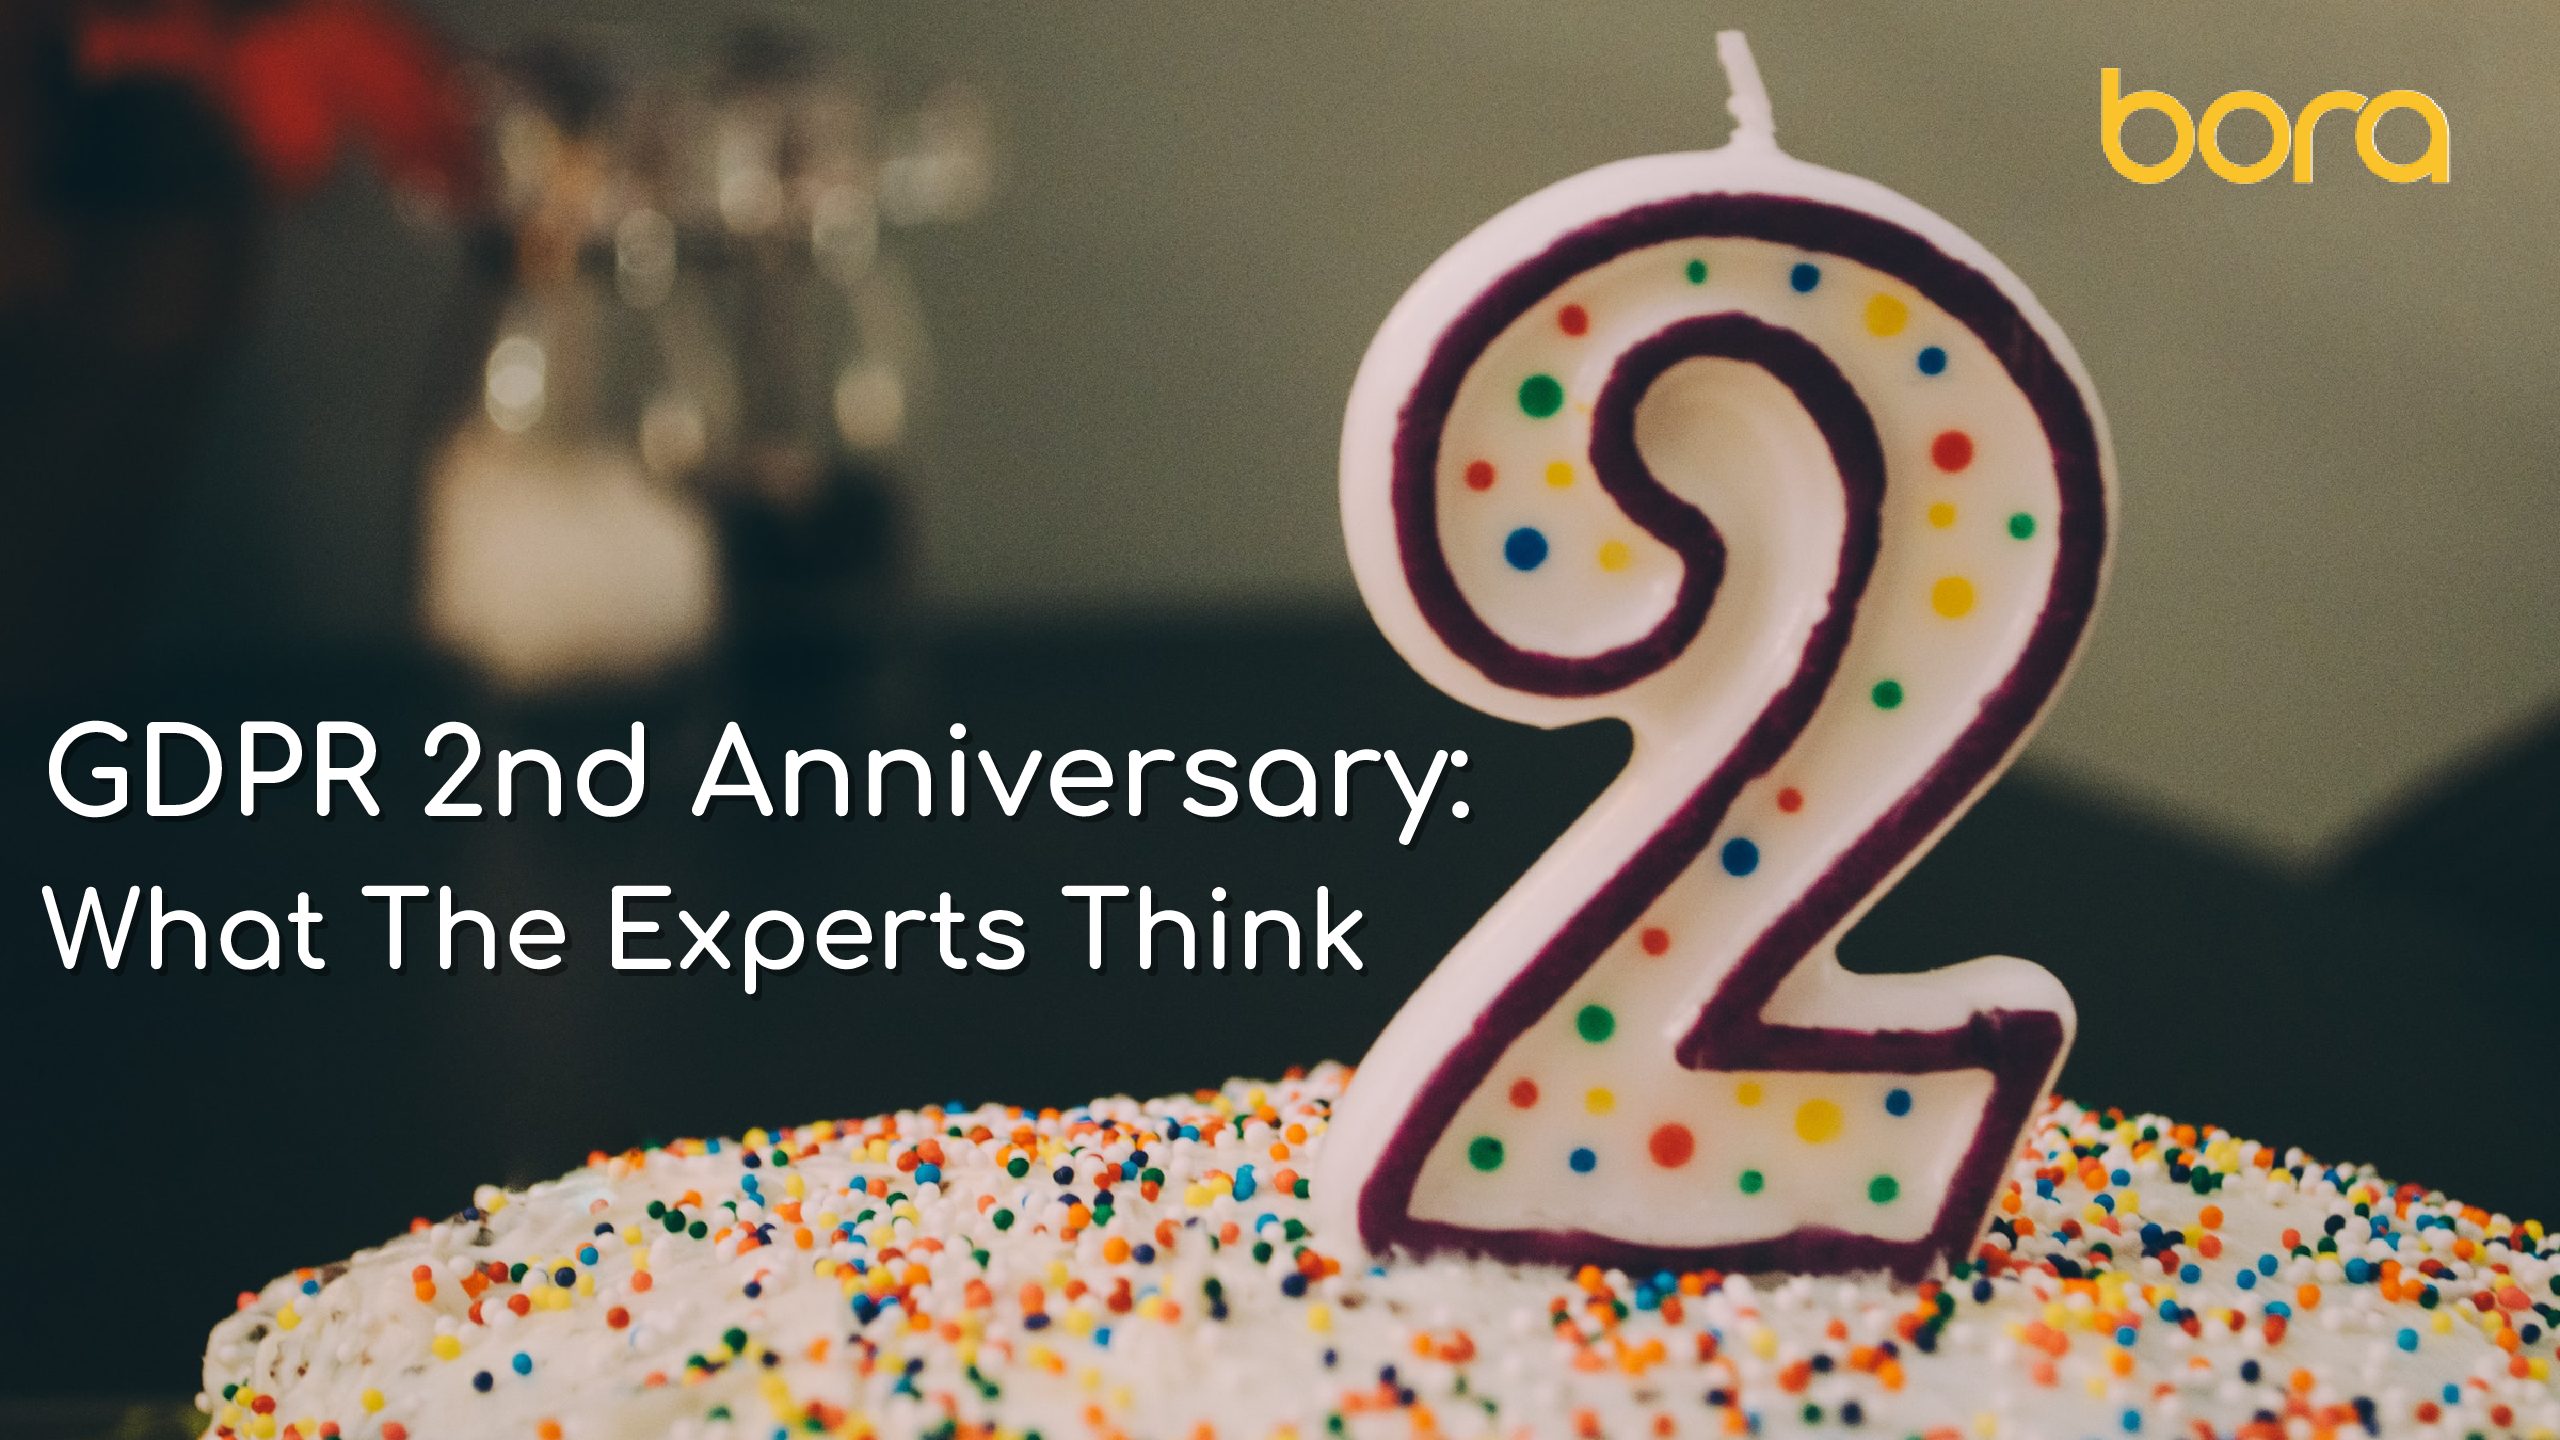 GDPR 2nd Anniversary: What The Experts Think